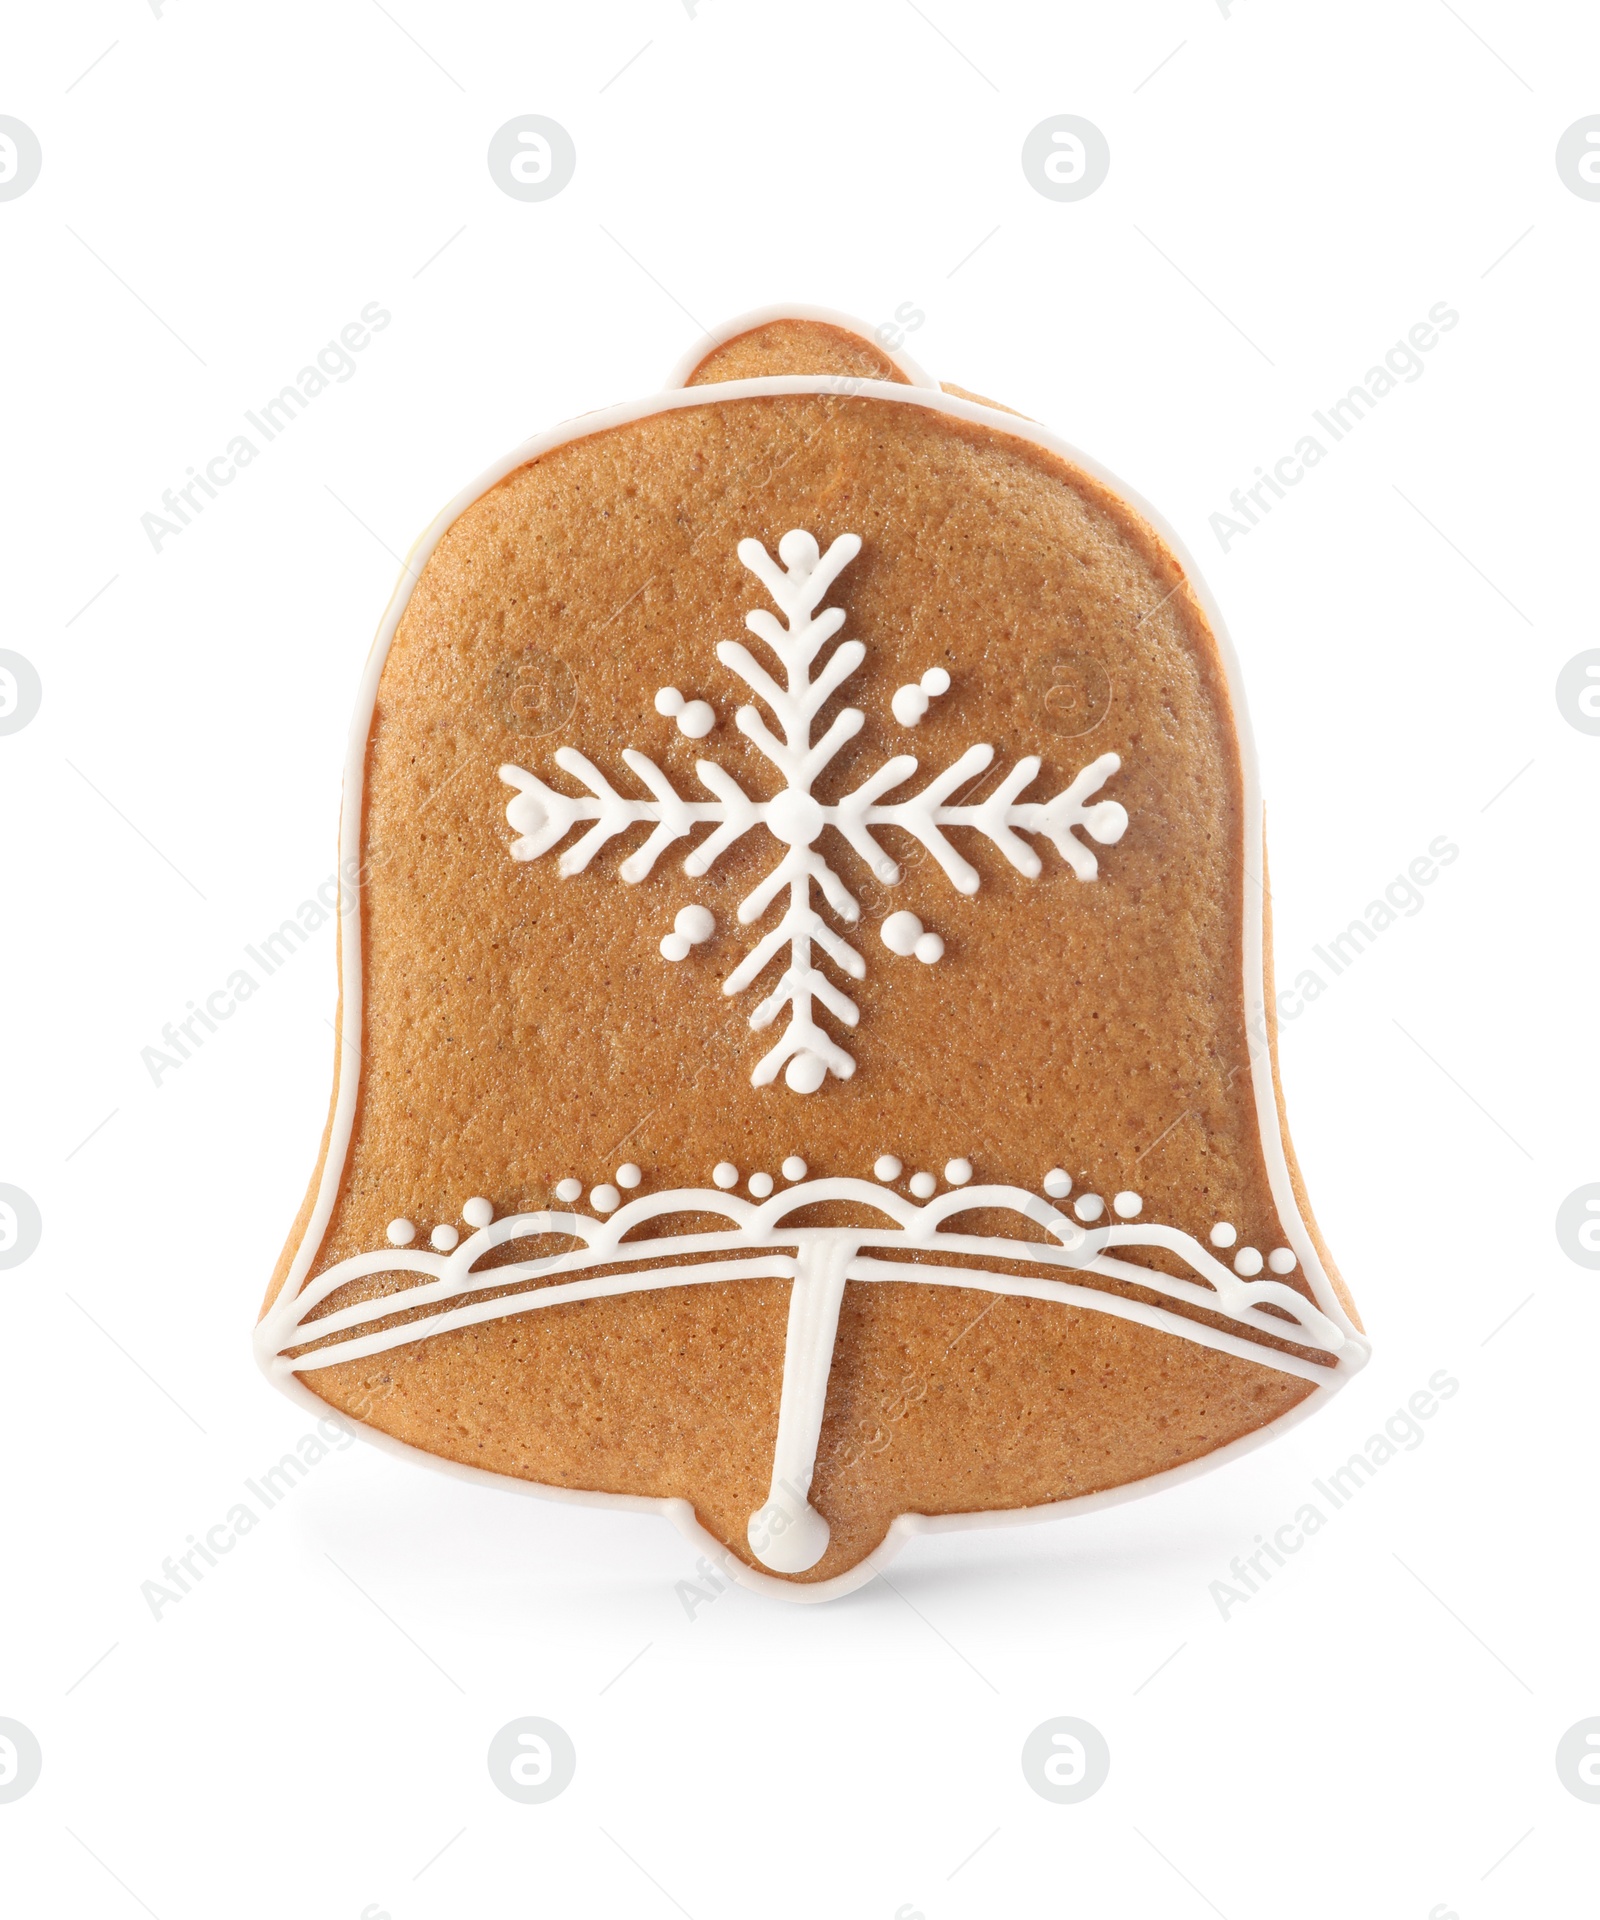 Photo of Bell shaped Christmas cookie isolated on white